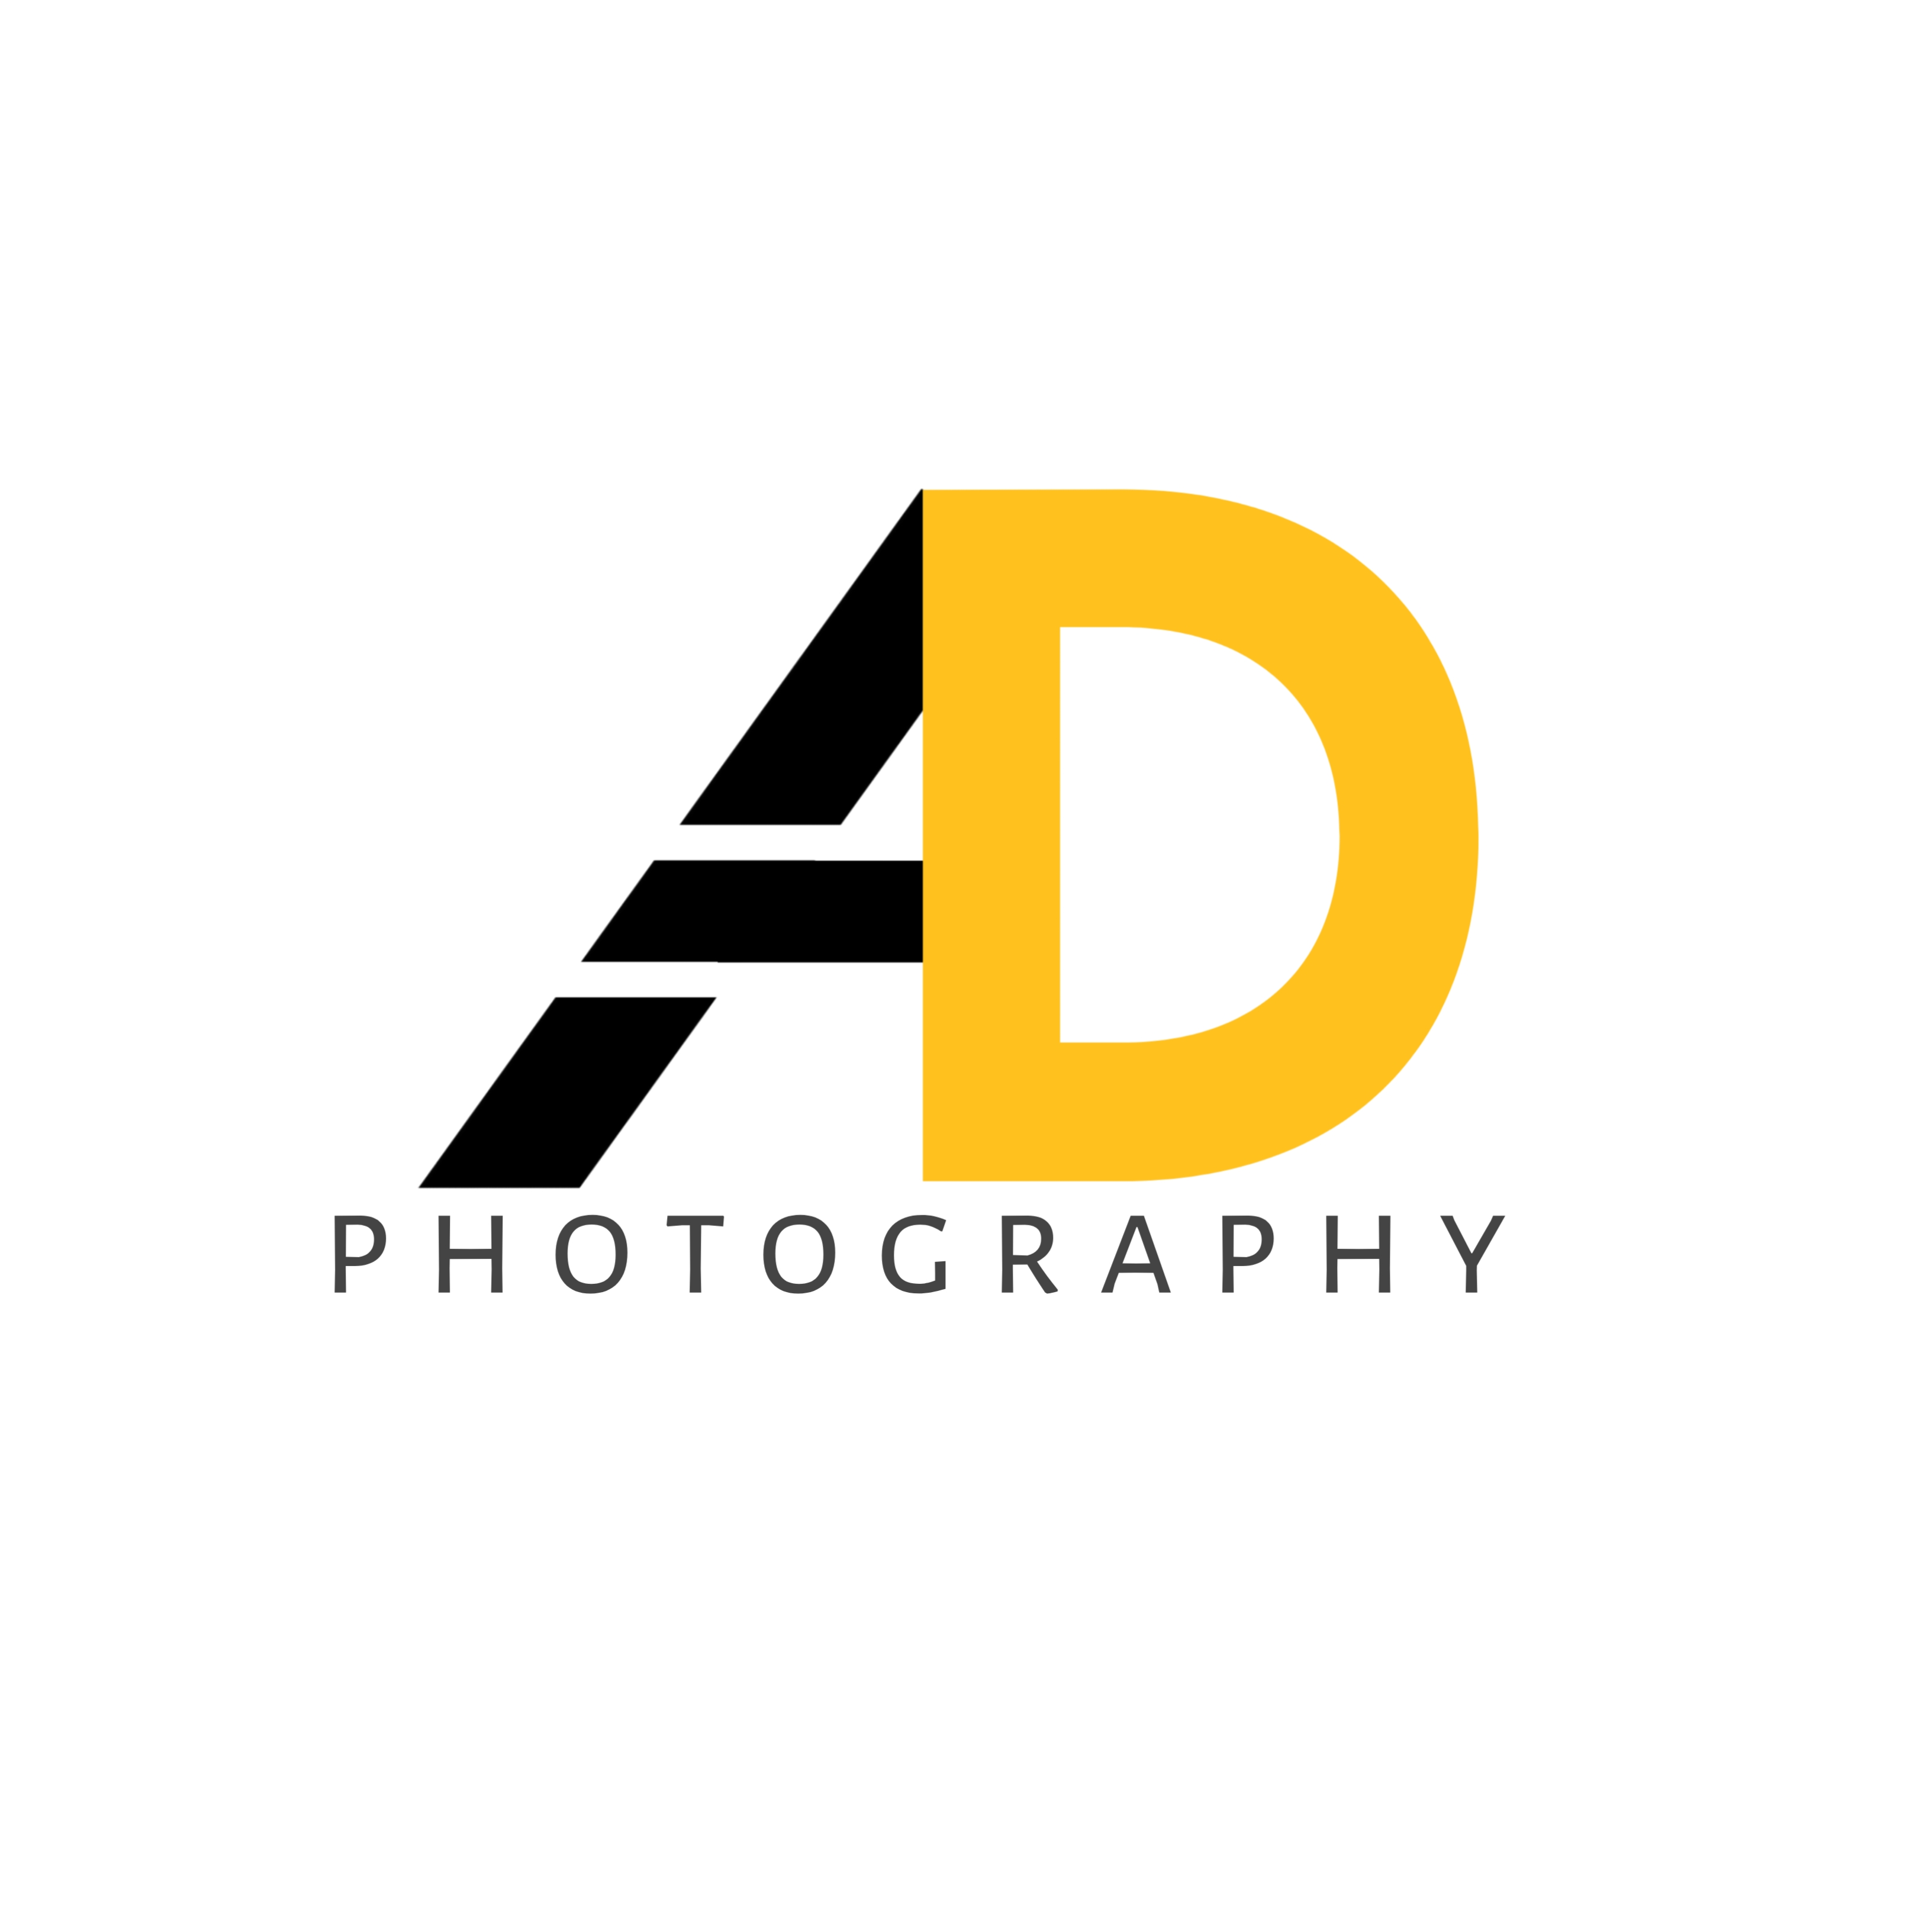 Black and yellow logo for a photographer.